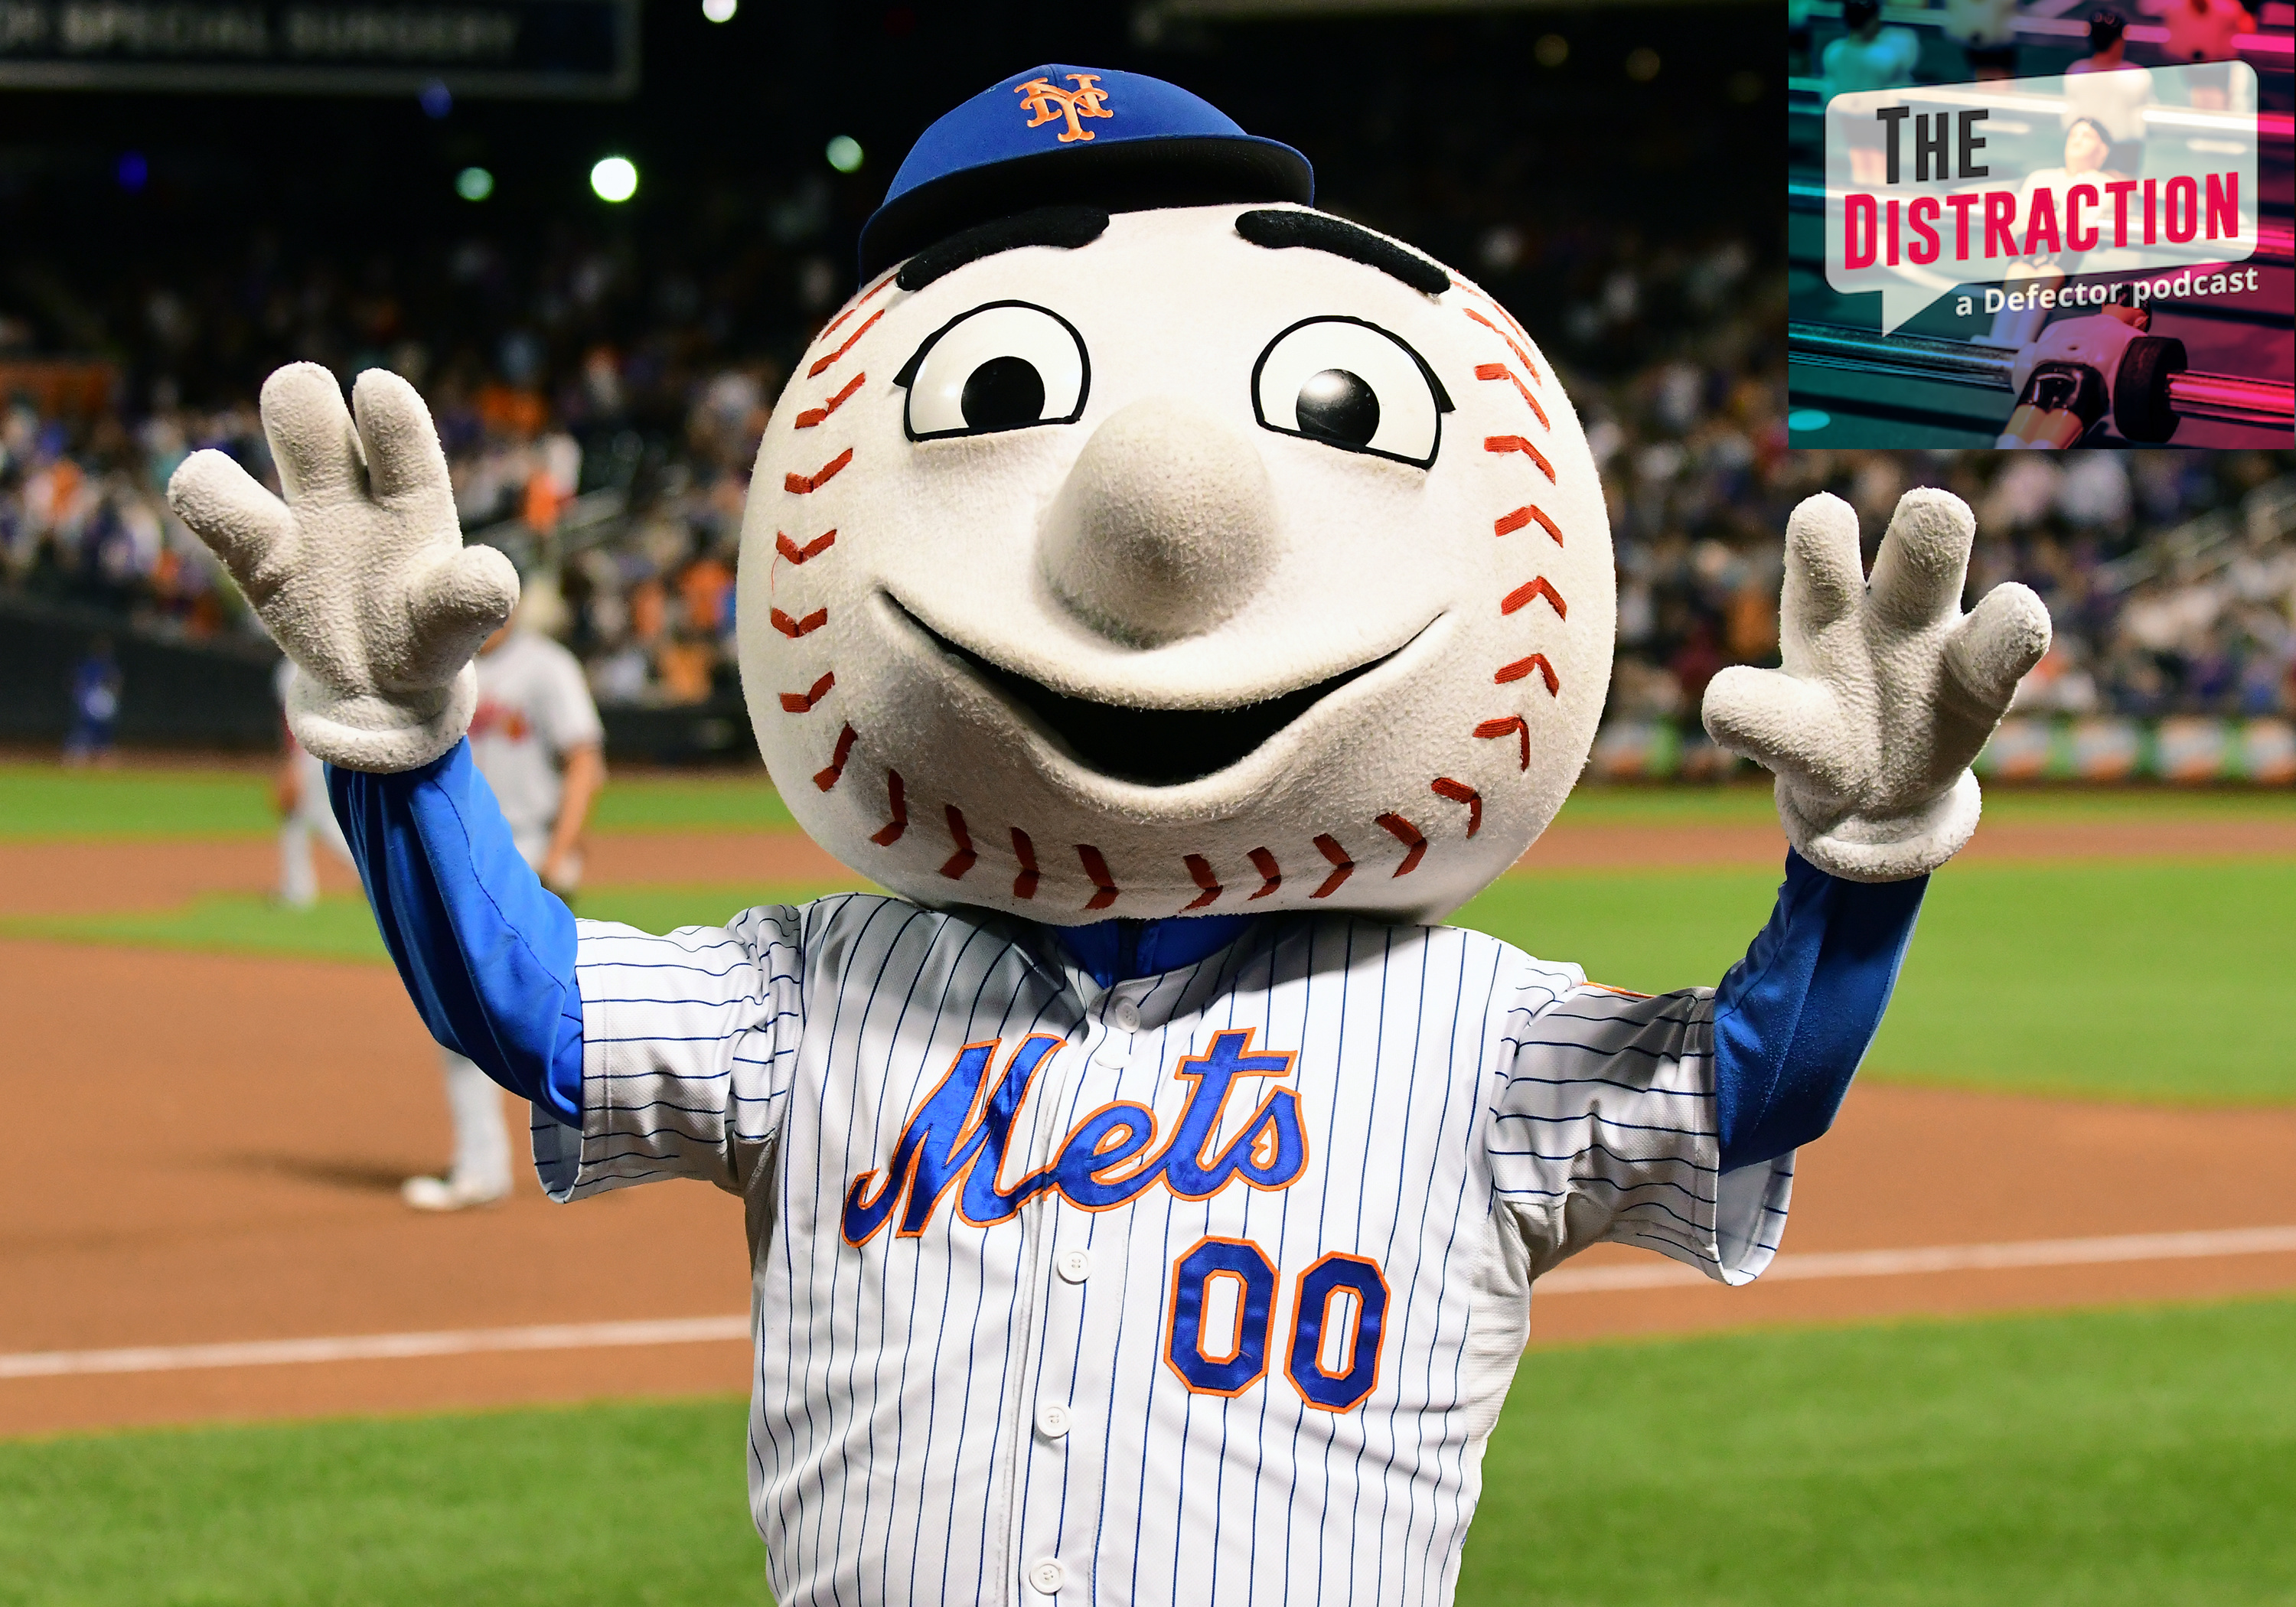 Mr. Met striking a benignly unsettling Mr. Met-style pose on the field during a Mets game.